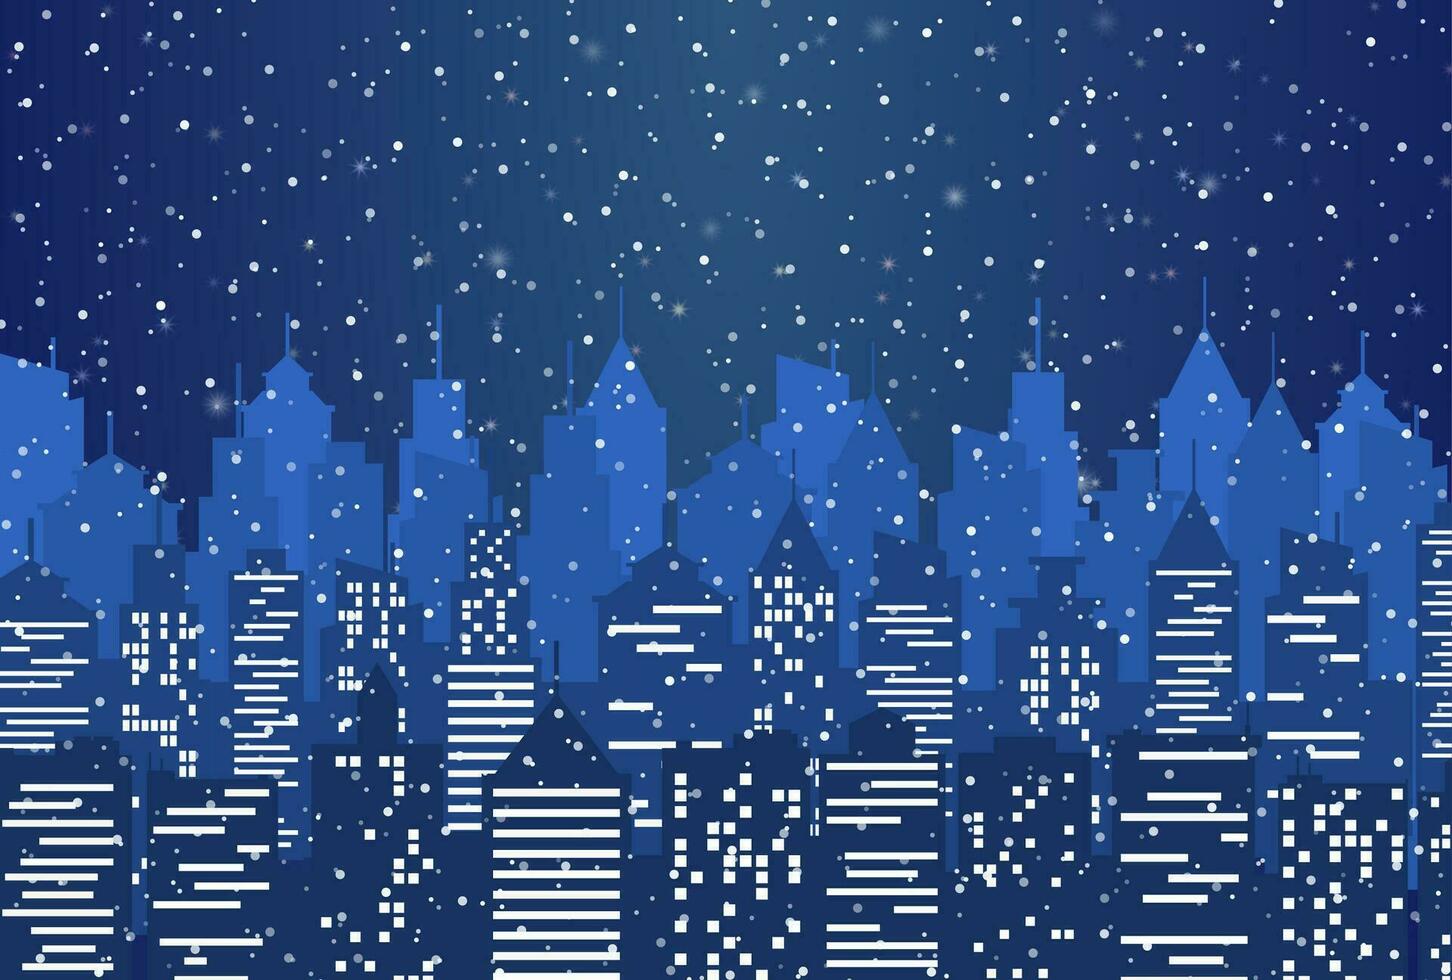 Silhouette of the city with cloudy night sky vector